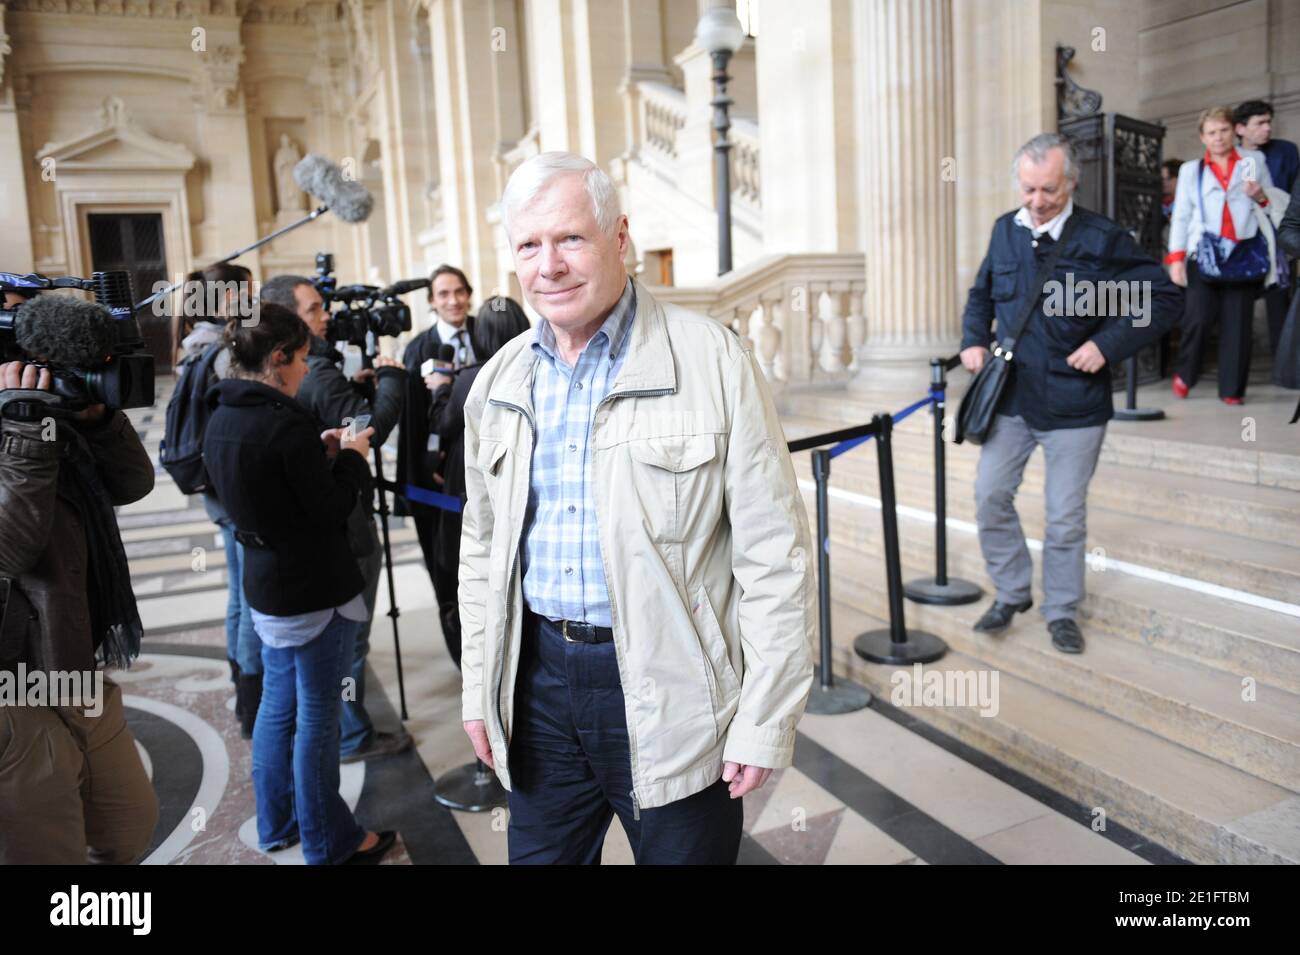 Frenchman Andre Bamberski leaving the Palais de Justice where he attended the second day of German cardiologist Dieter Krombach's trial for the murder of Kalinka Bamberski, in Paris, France on March 30, 2011. The French court today decided to continue the trial of the German doctor, who is accused of having raped and killed his then 14-year-old stepdaughter, Kalinka Bamberski, in the summer of 1982 while she was holidaying with her mother at Krombach's home at Lake Constance, southern Germany. A court in Germany ruled that Krombach could not be held responsible for the death, but in 1995 a cou Stock Photo